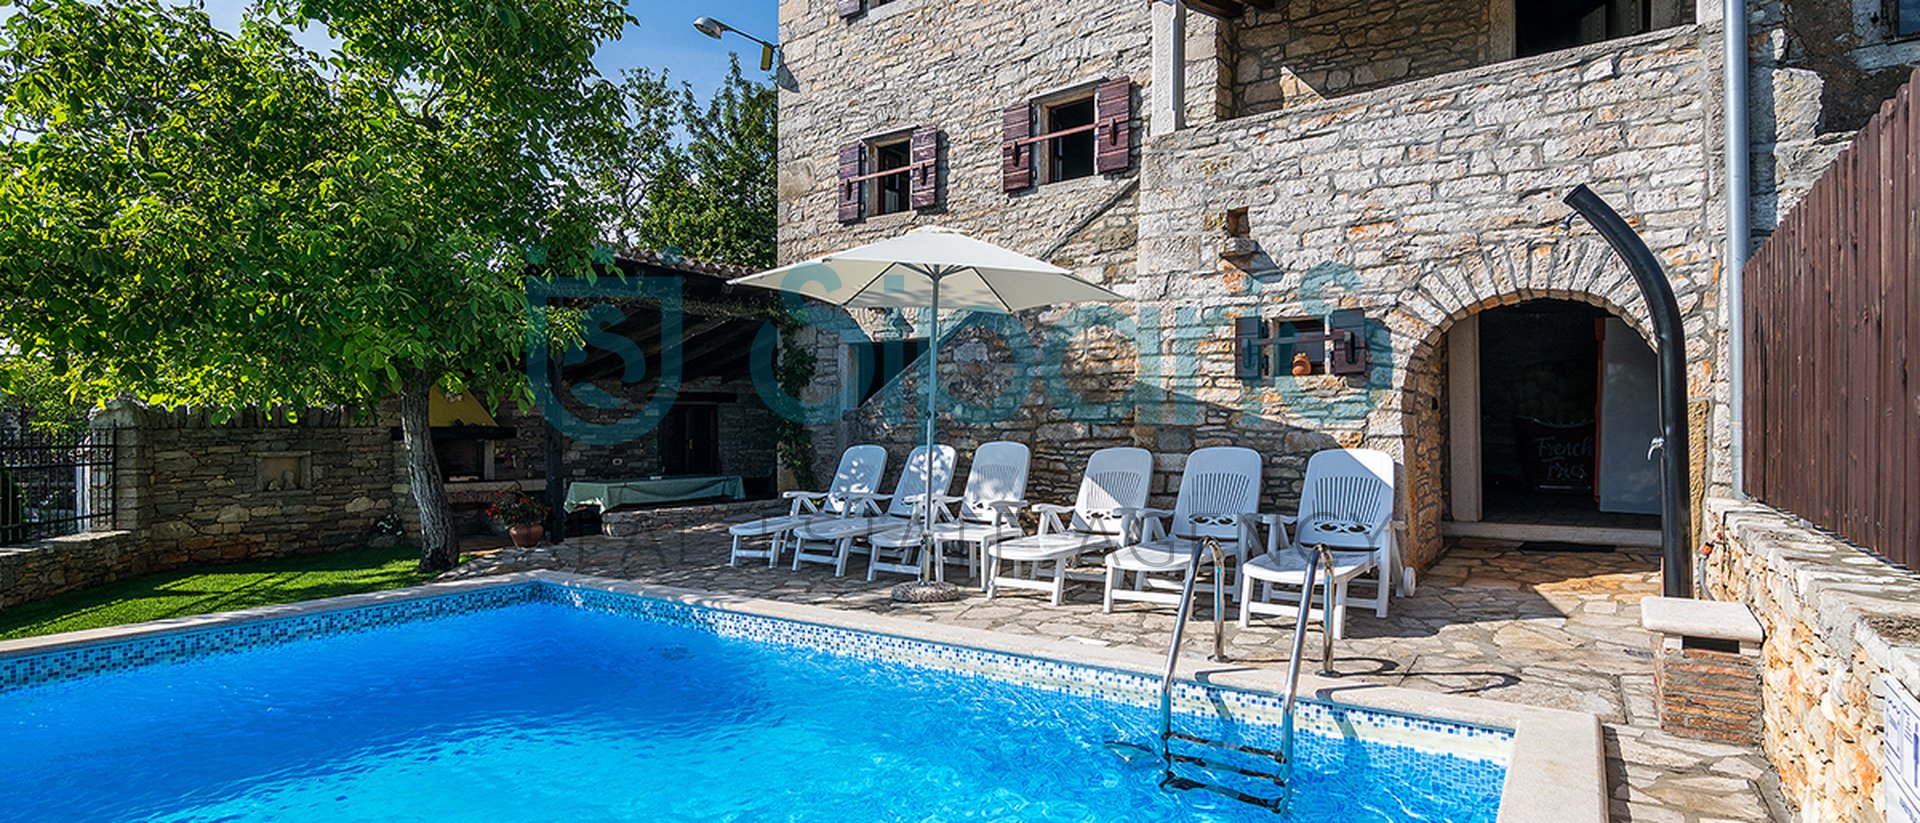 Zrenj Two stone house, one with pool the other for renovation